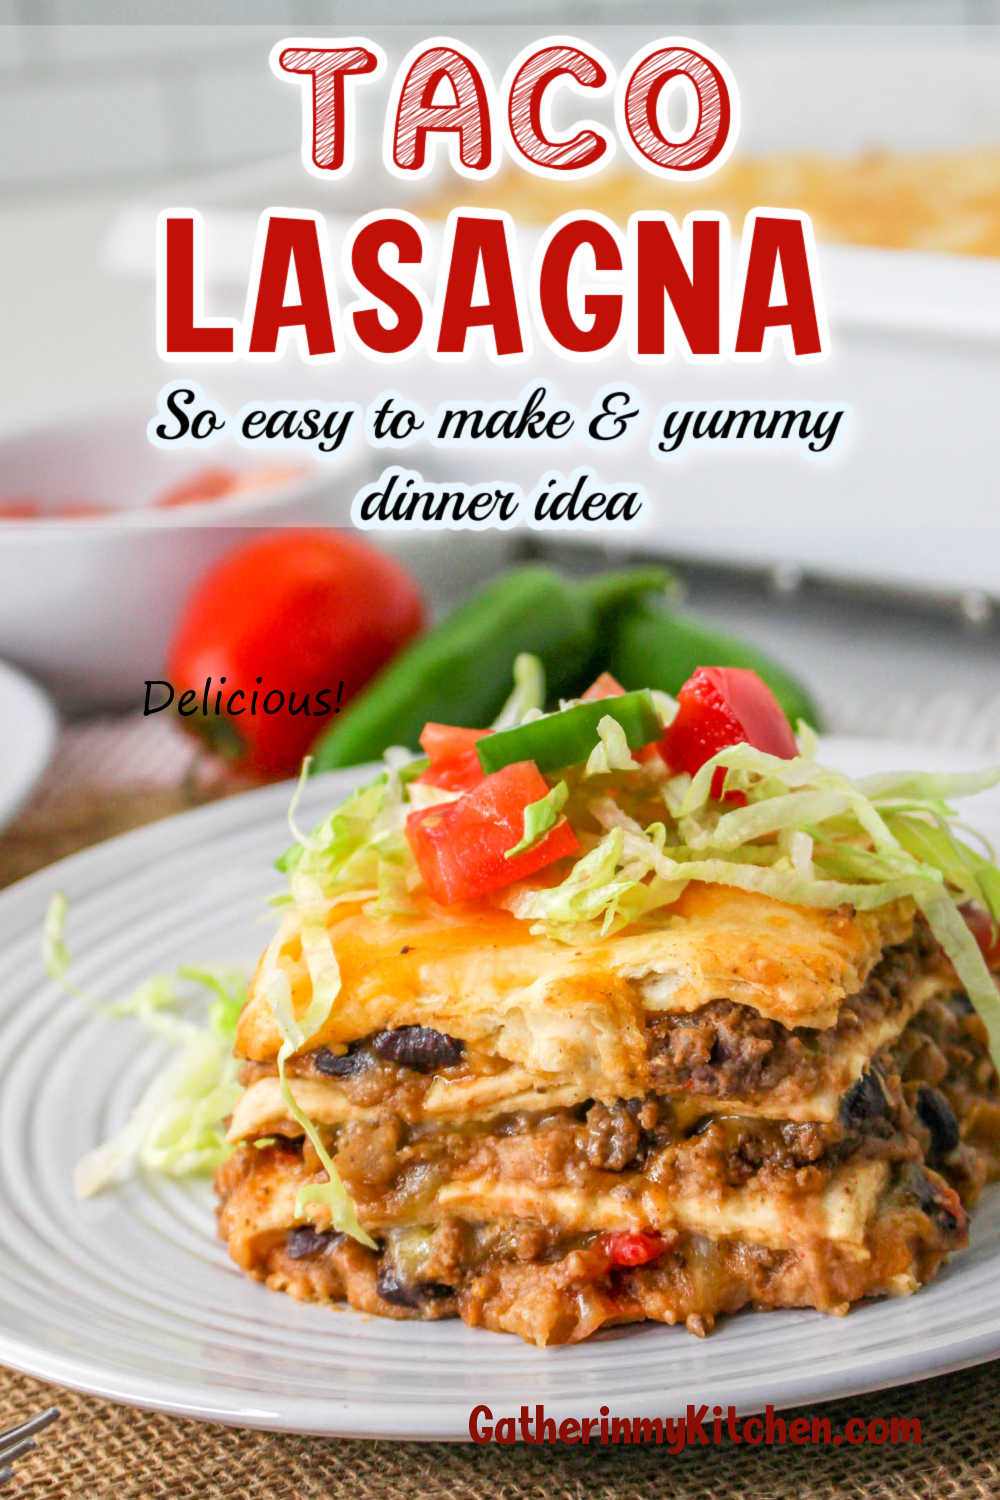 Pin image: top says "Taco Lasagna so easy to make and yummy dinner idea" and background shows a plate of a slice of taco lasagna